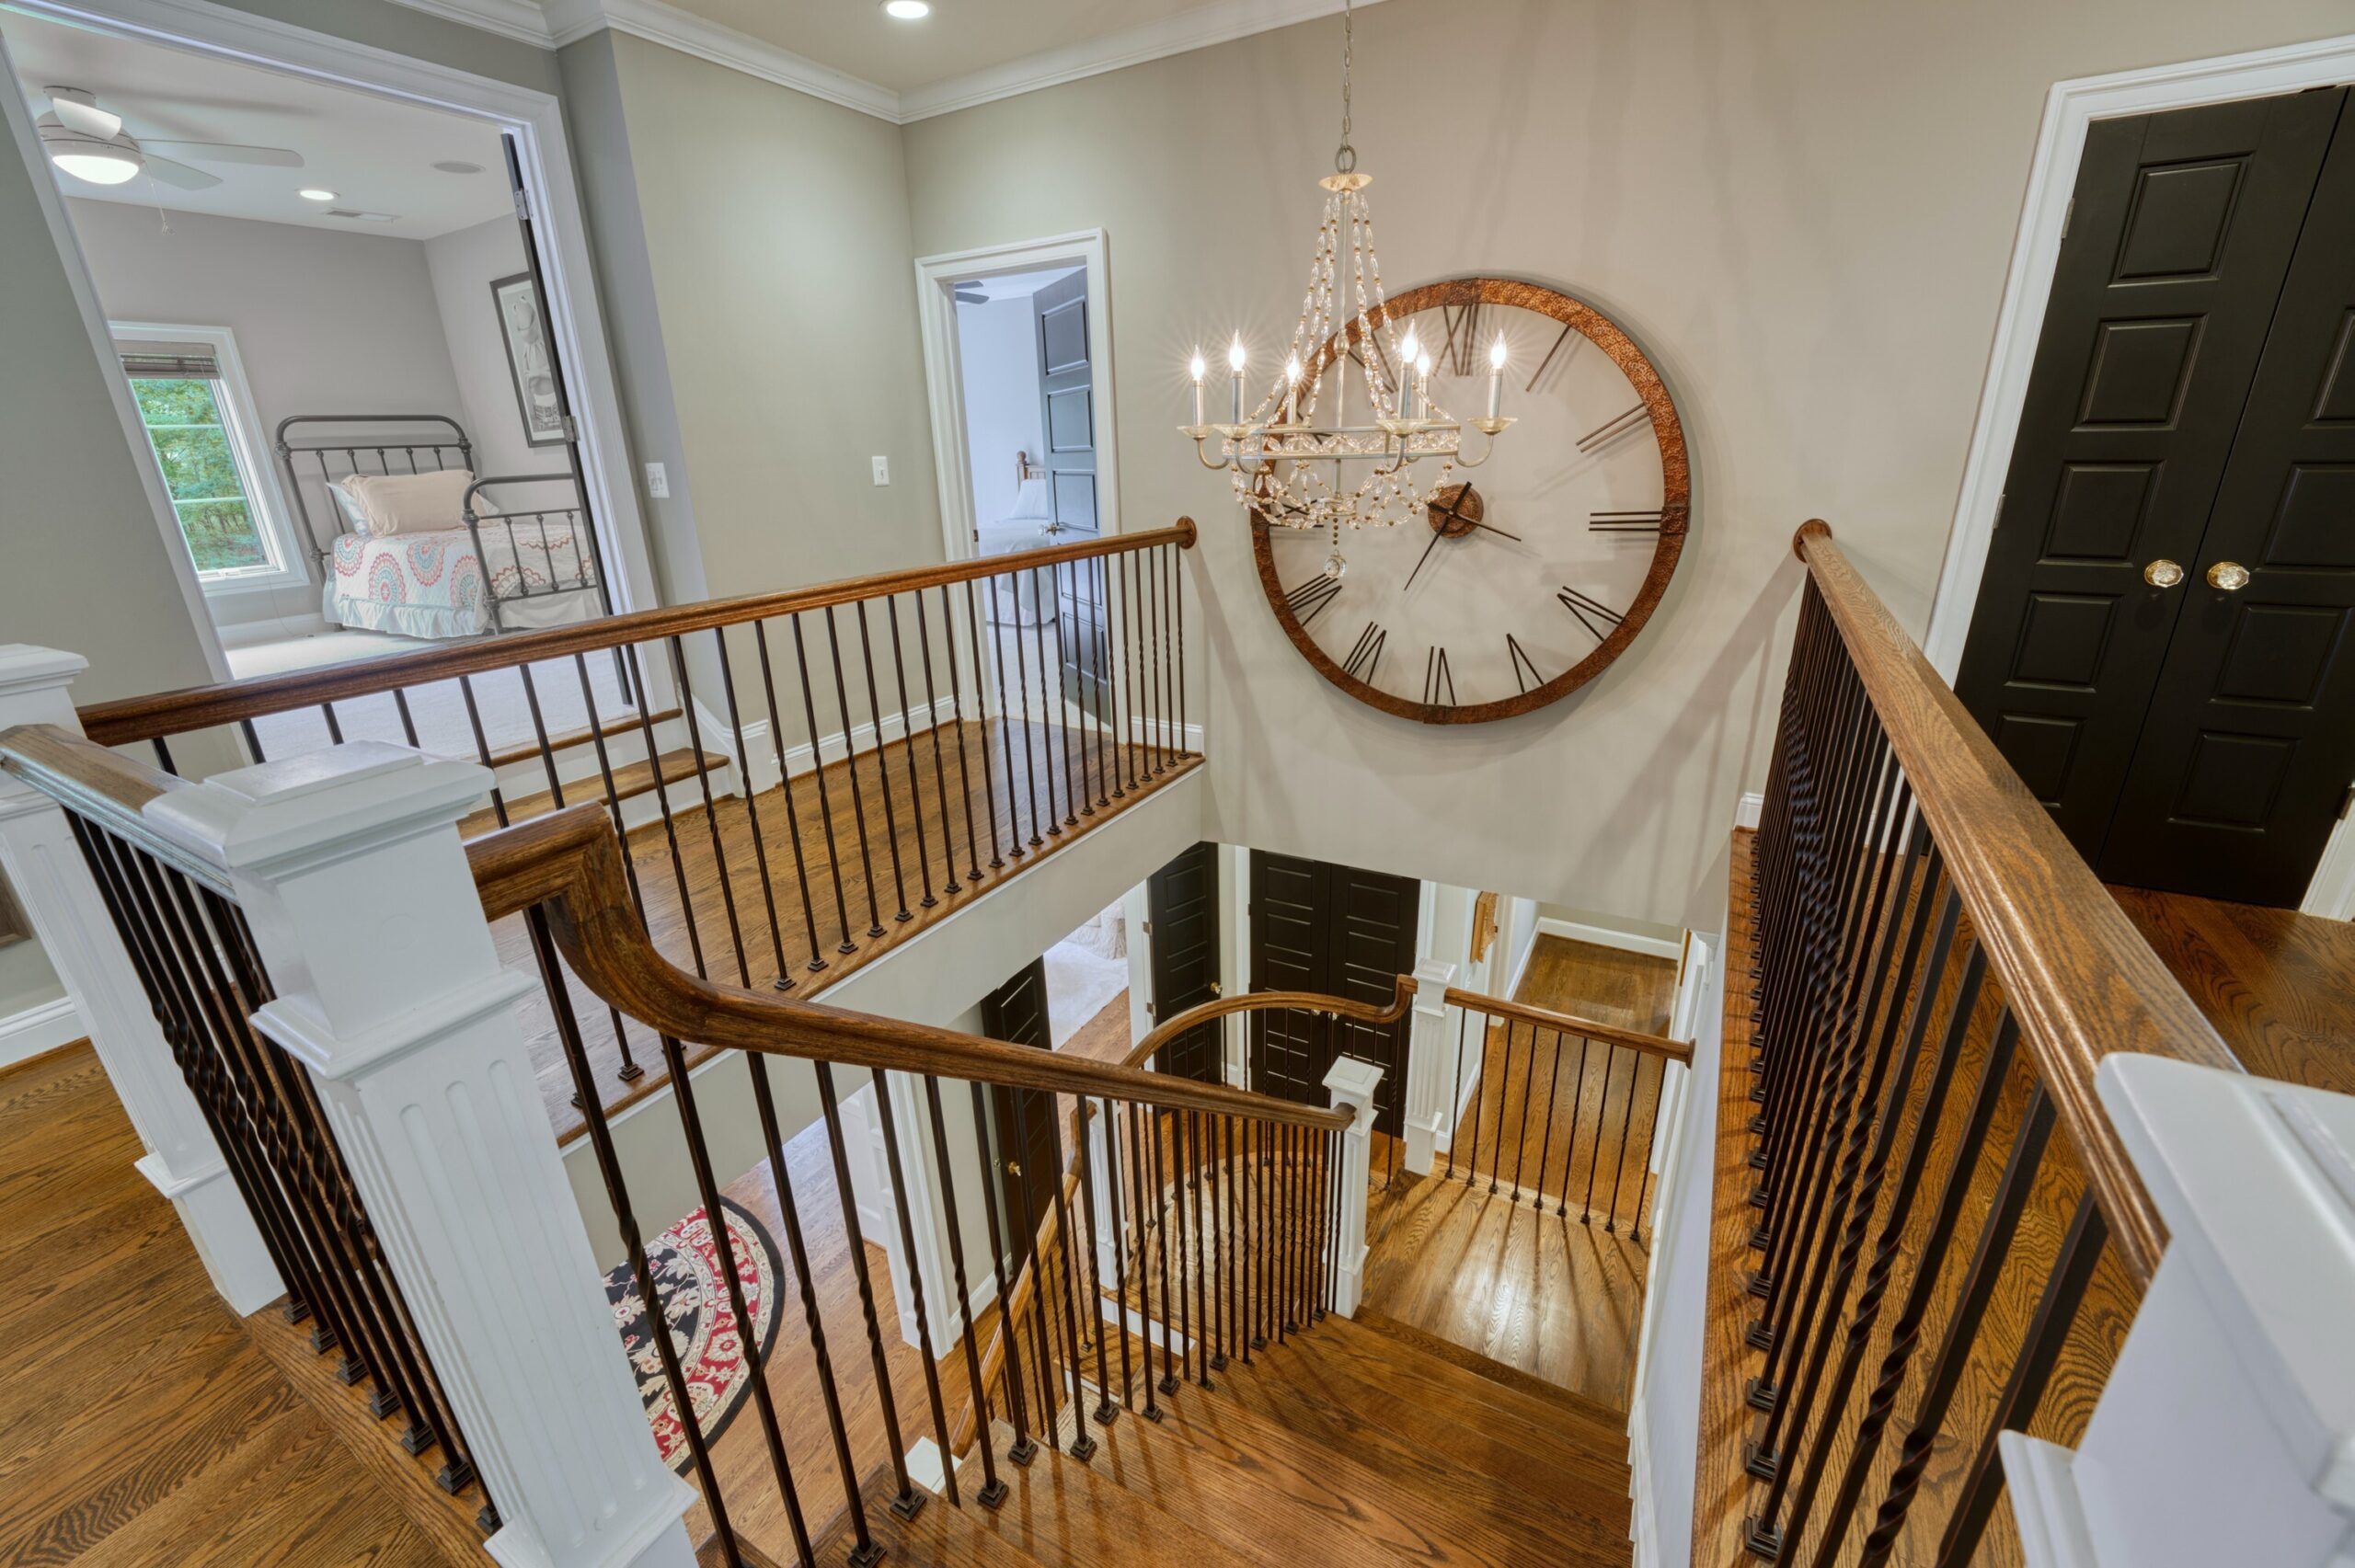 Professional interior photo of 40046 Mount Gilead Rd in Leesburg, Virginia - showing the staircase looking down from the upper floor. The railing is oak and the spindles are black iron